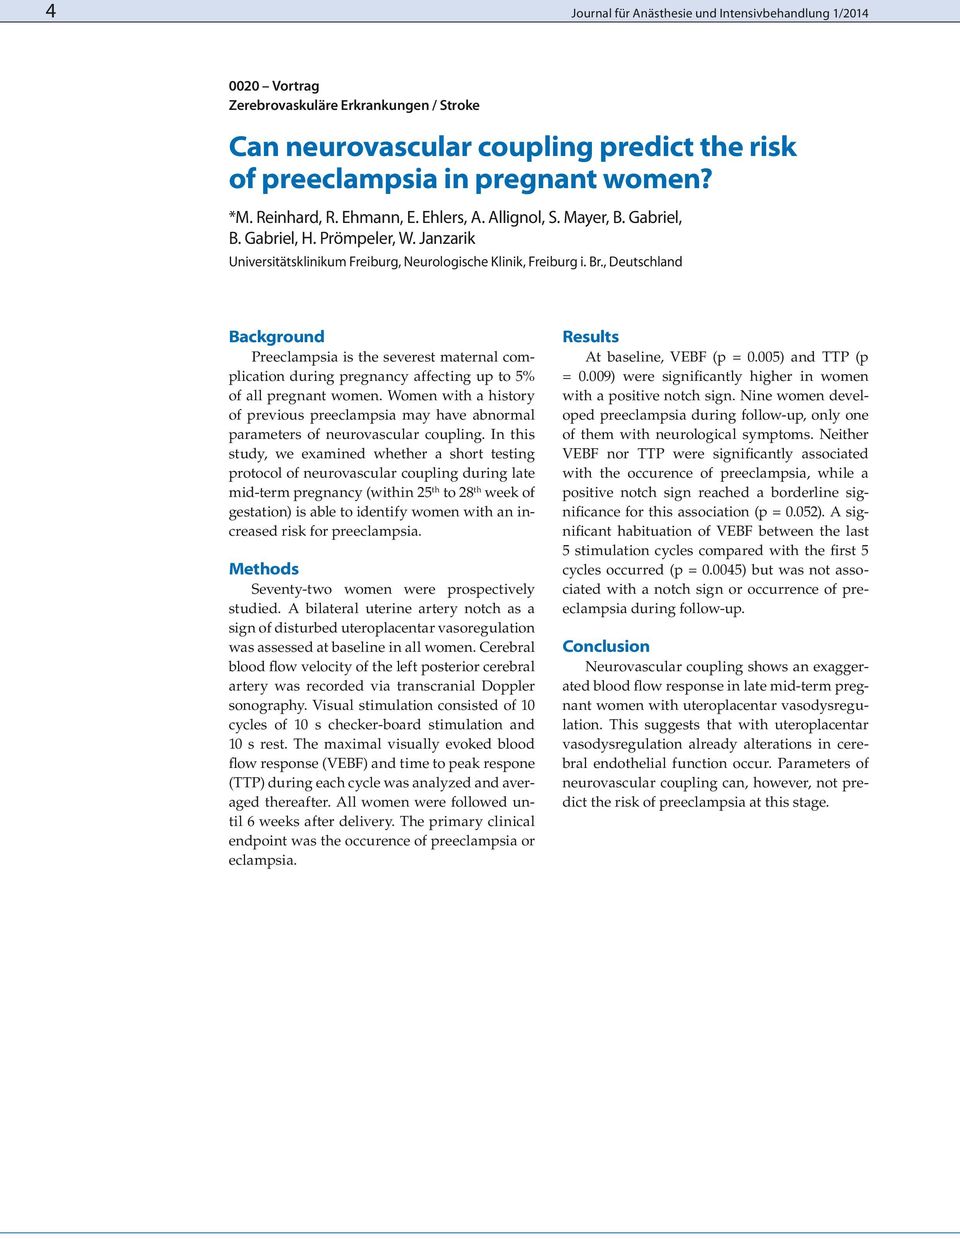 , Deutschland Background Preeclampsia is the severest maternal complication during pregnancy affecting up to 5% of all pregnant women.